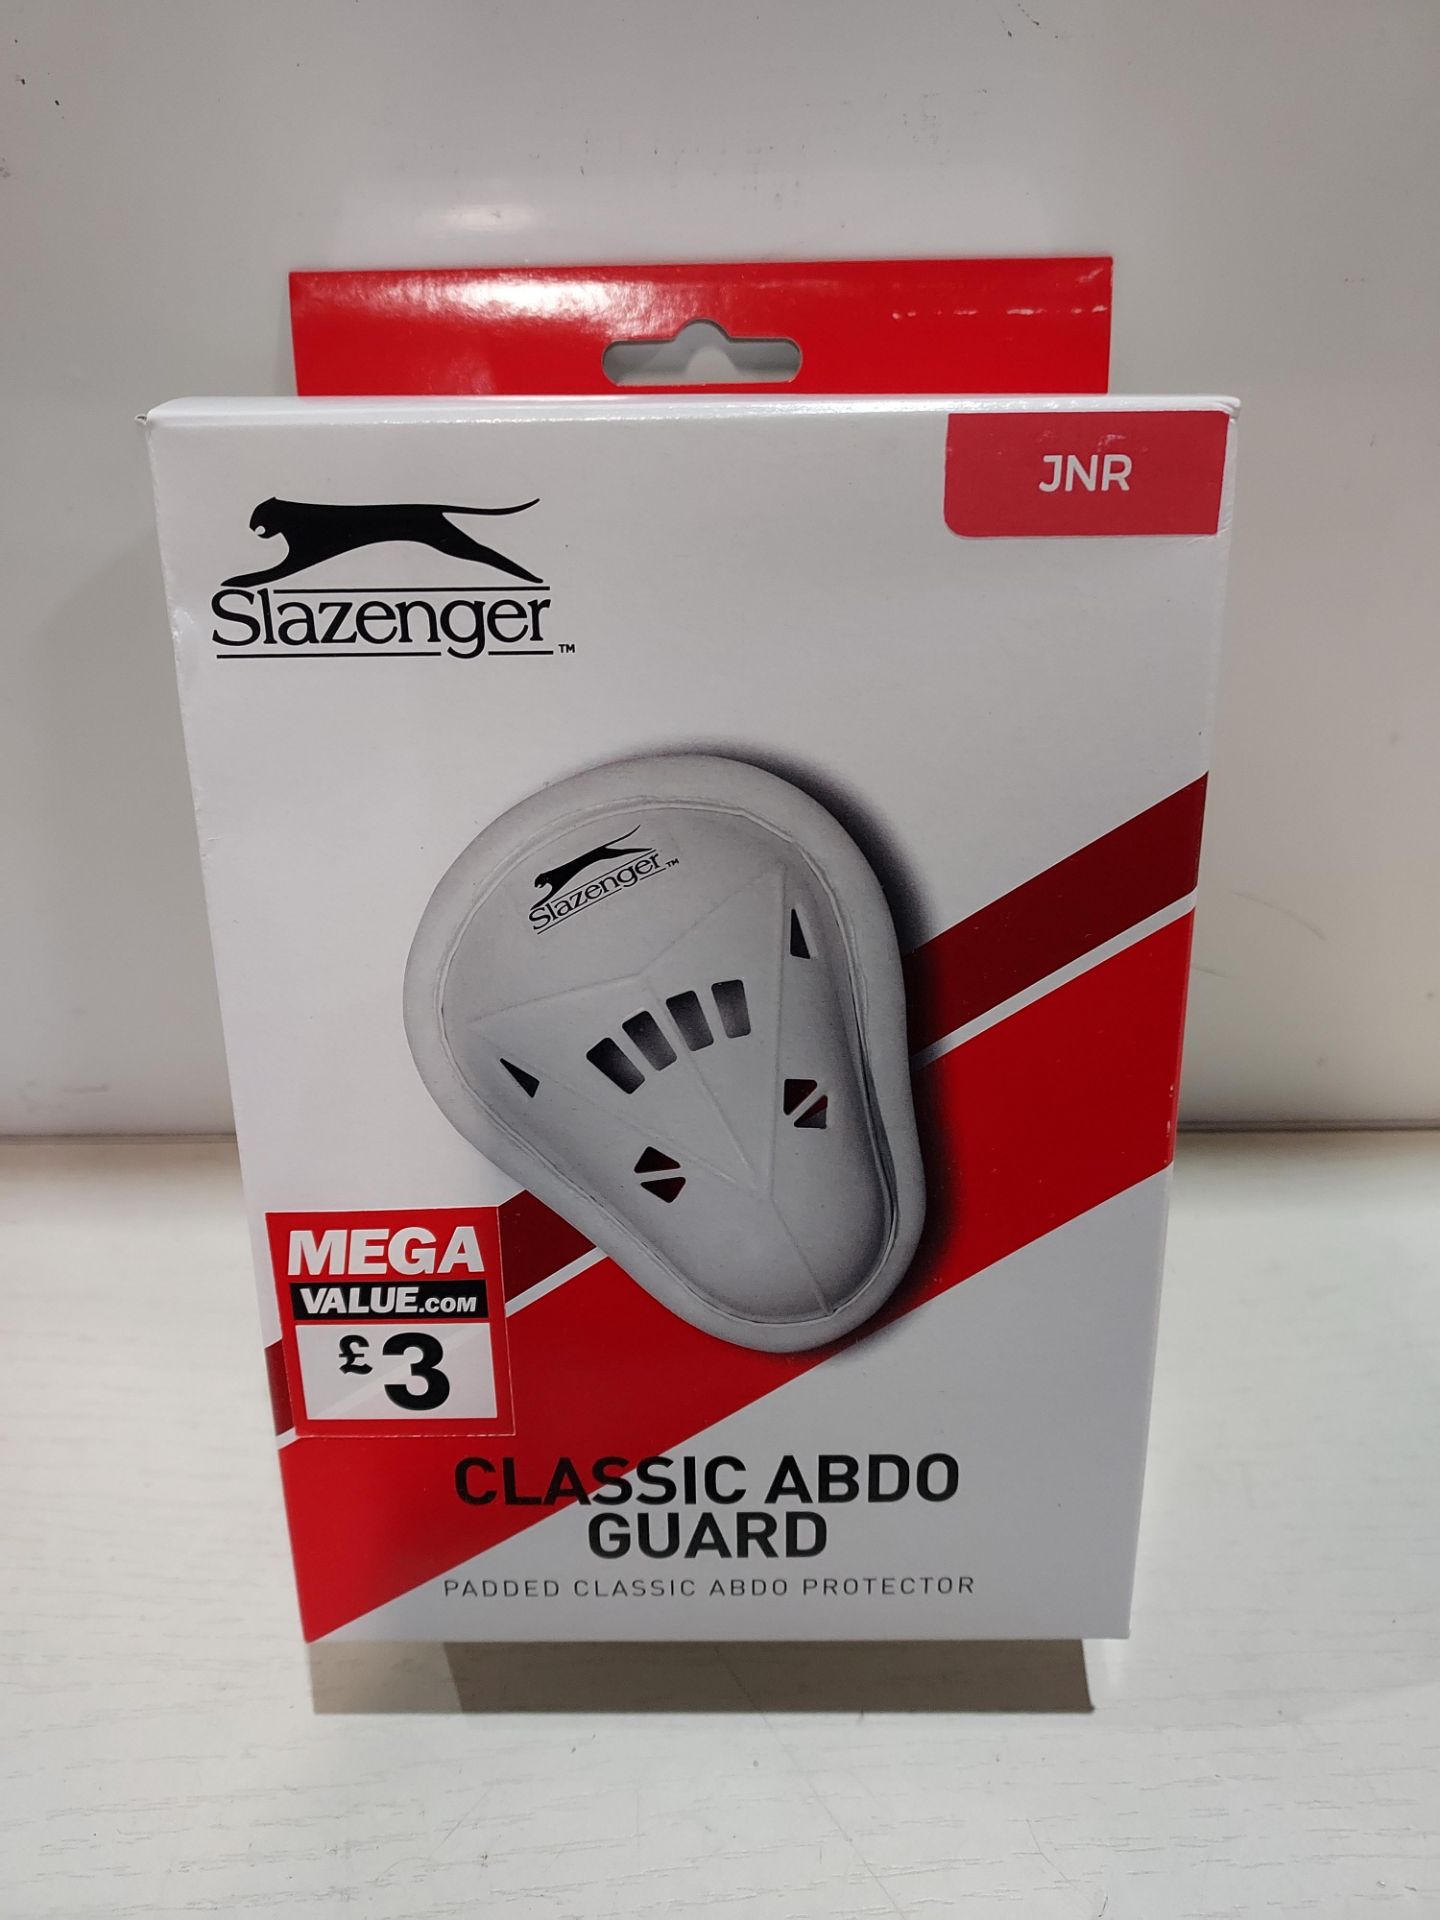 160 PIECE BRAND NEW JUNIOR CLASSIC ABDO GUARD MOULDED SHELL WITH PADDED EDGE LIGHTWEIGHT IN 4 BOXES